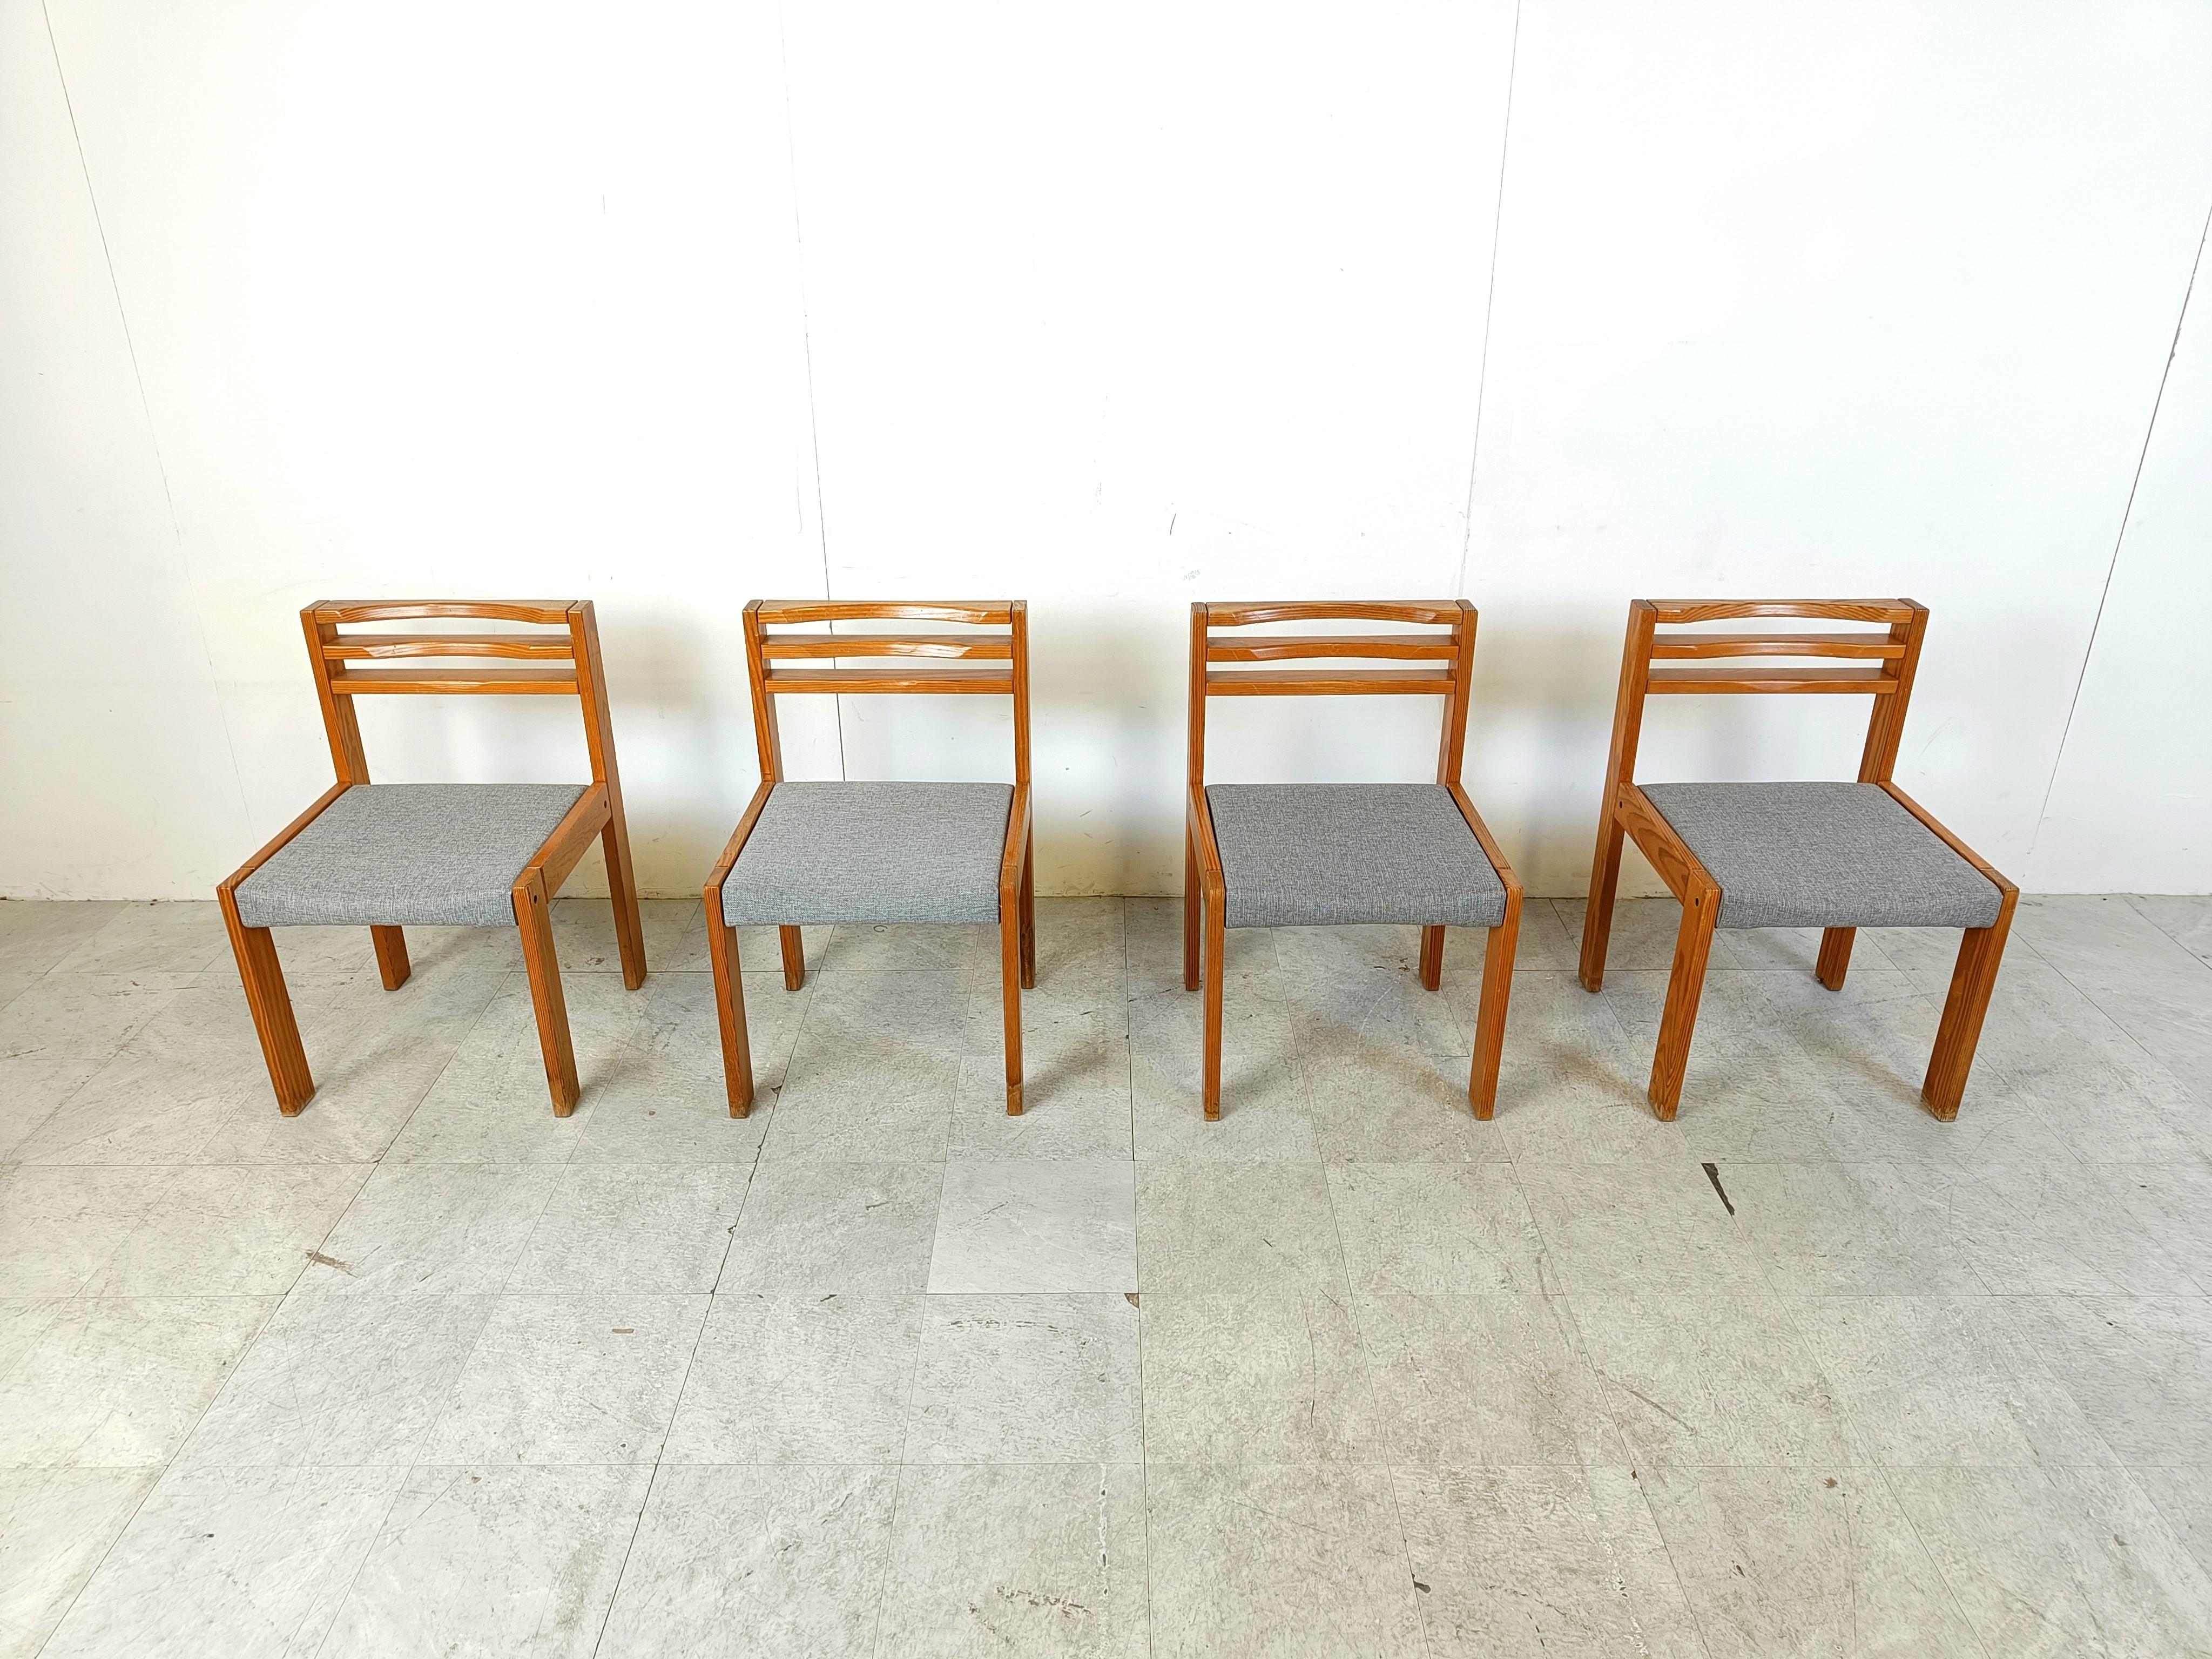 Set of 4 SG 1200 dining chairs designed by Cees Braakman for Pastoe.

The chairs have a pine wood frame with grey fabric seats.

Cool and stury timeless chairs

1970s - The Netherlands

Height: 80cm/31.49